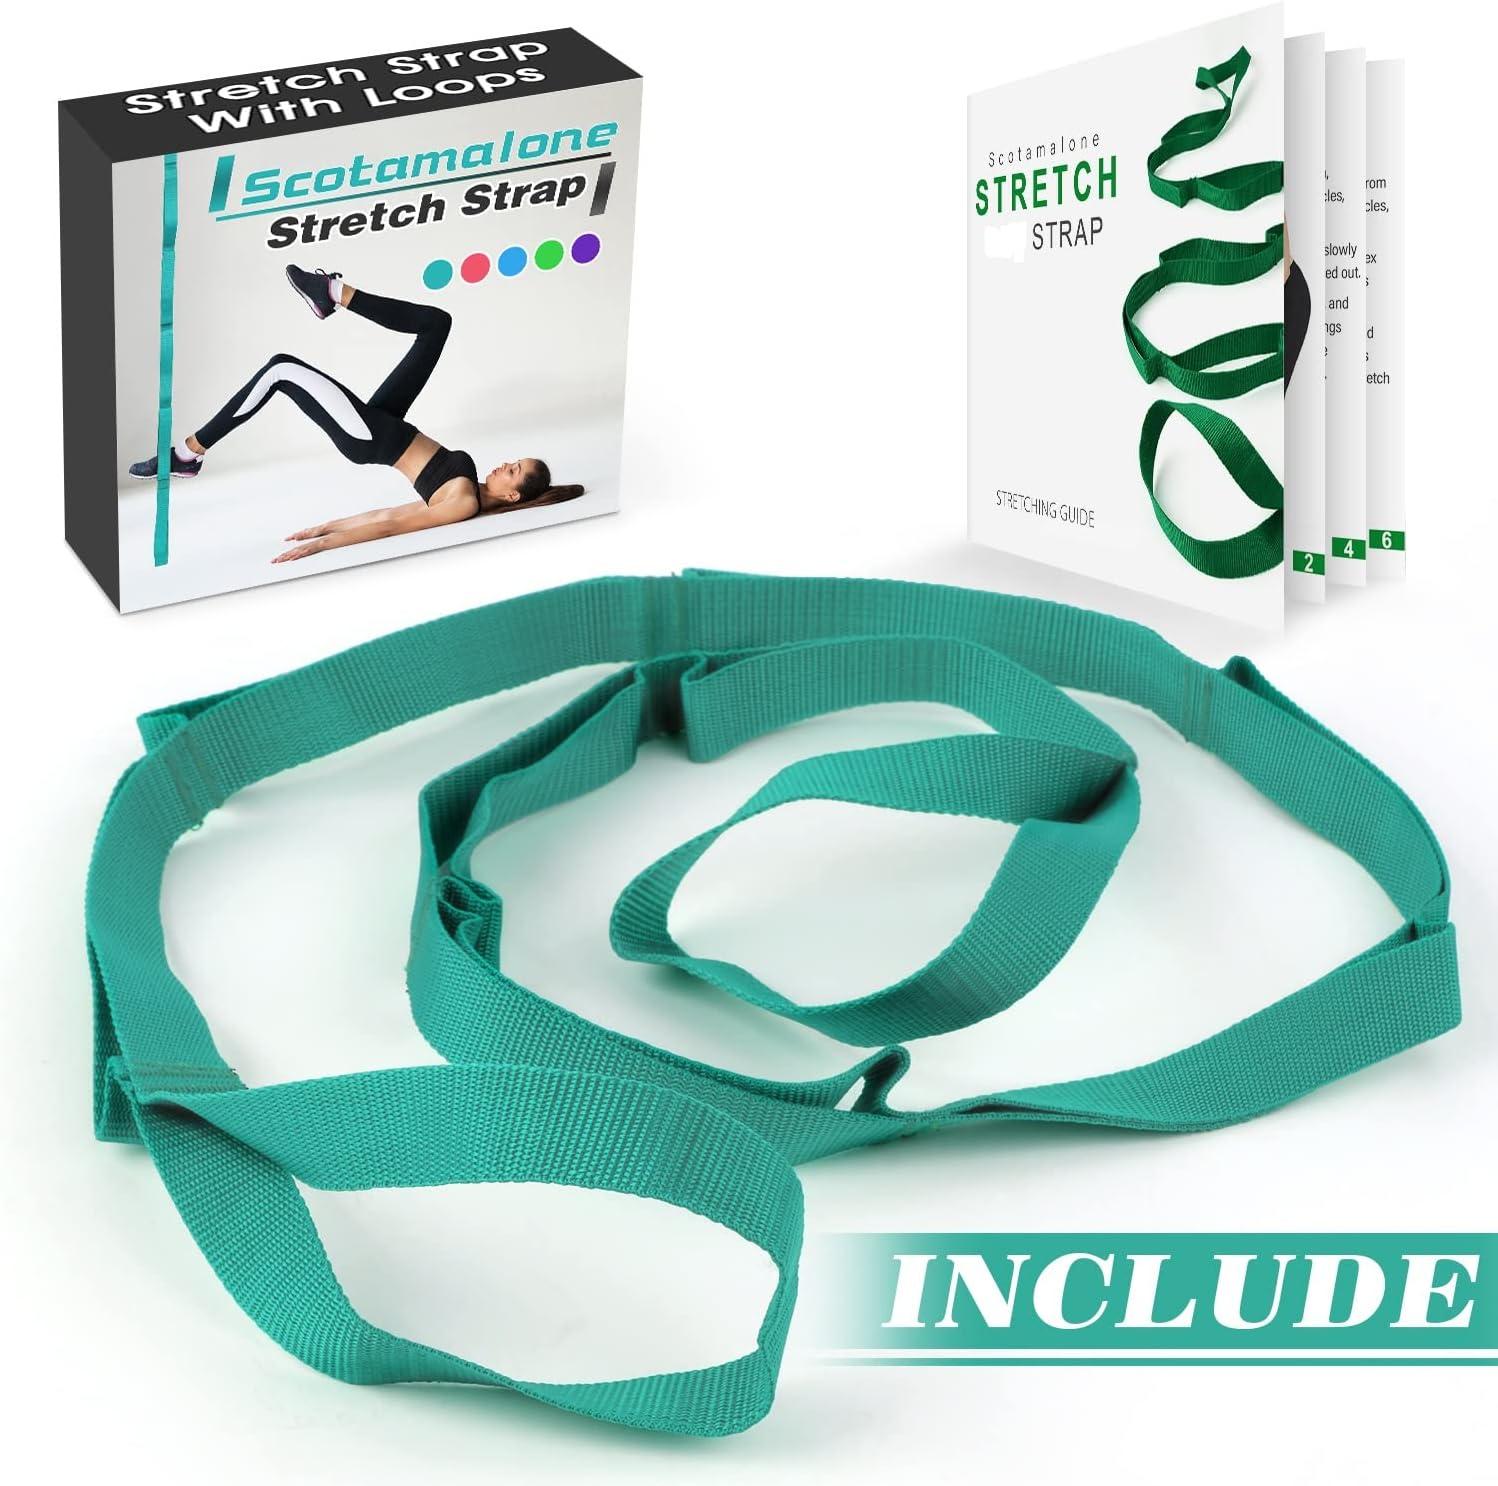 Scotamalone Yoga Strap Stretching Strap with Exercise Book